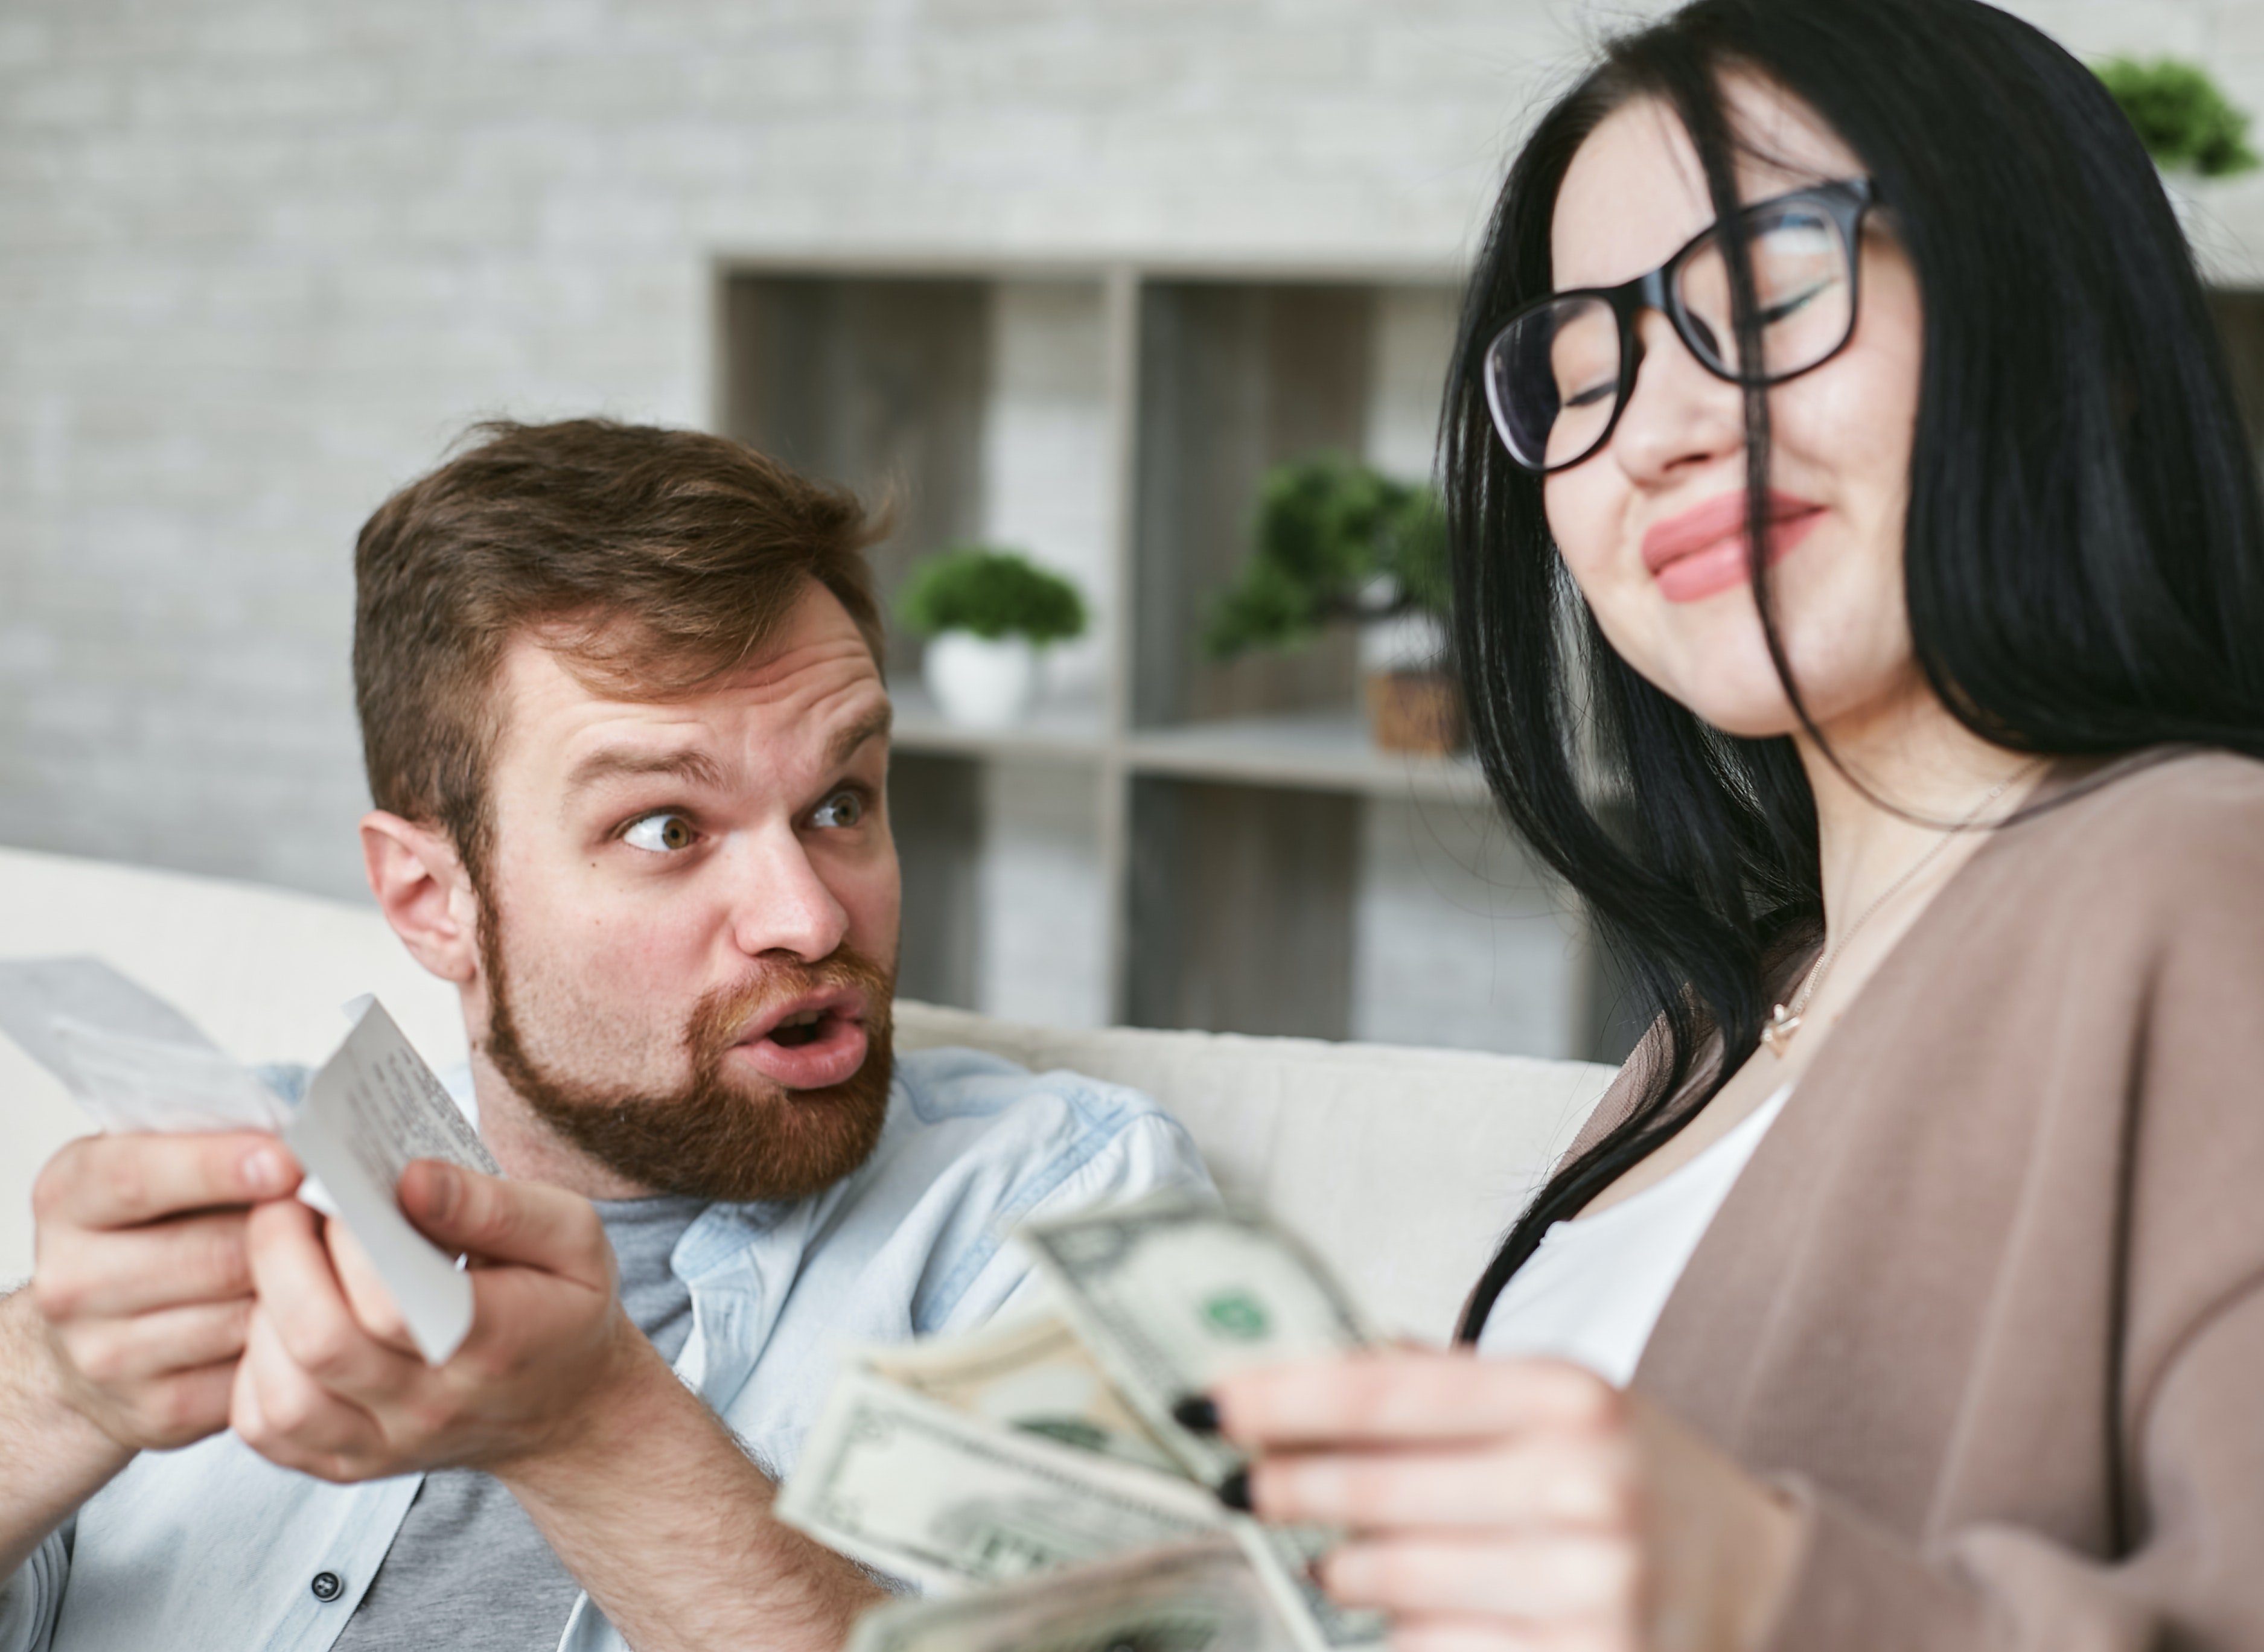 Money conversation is an opportunity to get to know your partner better | Photo: Pexels/mikhail-nilov